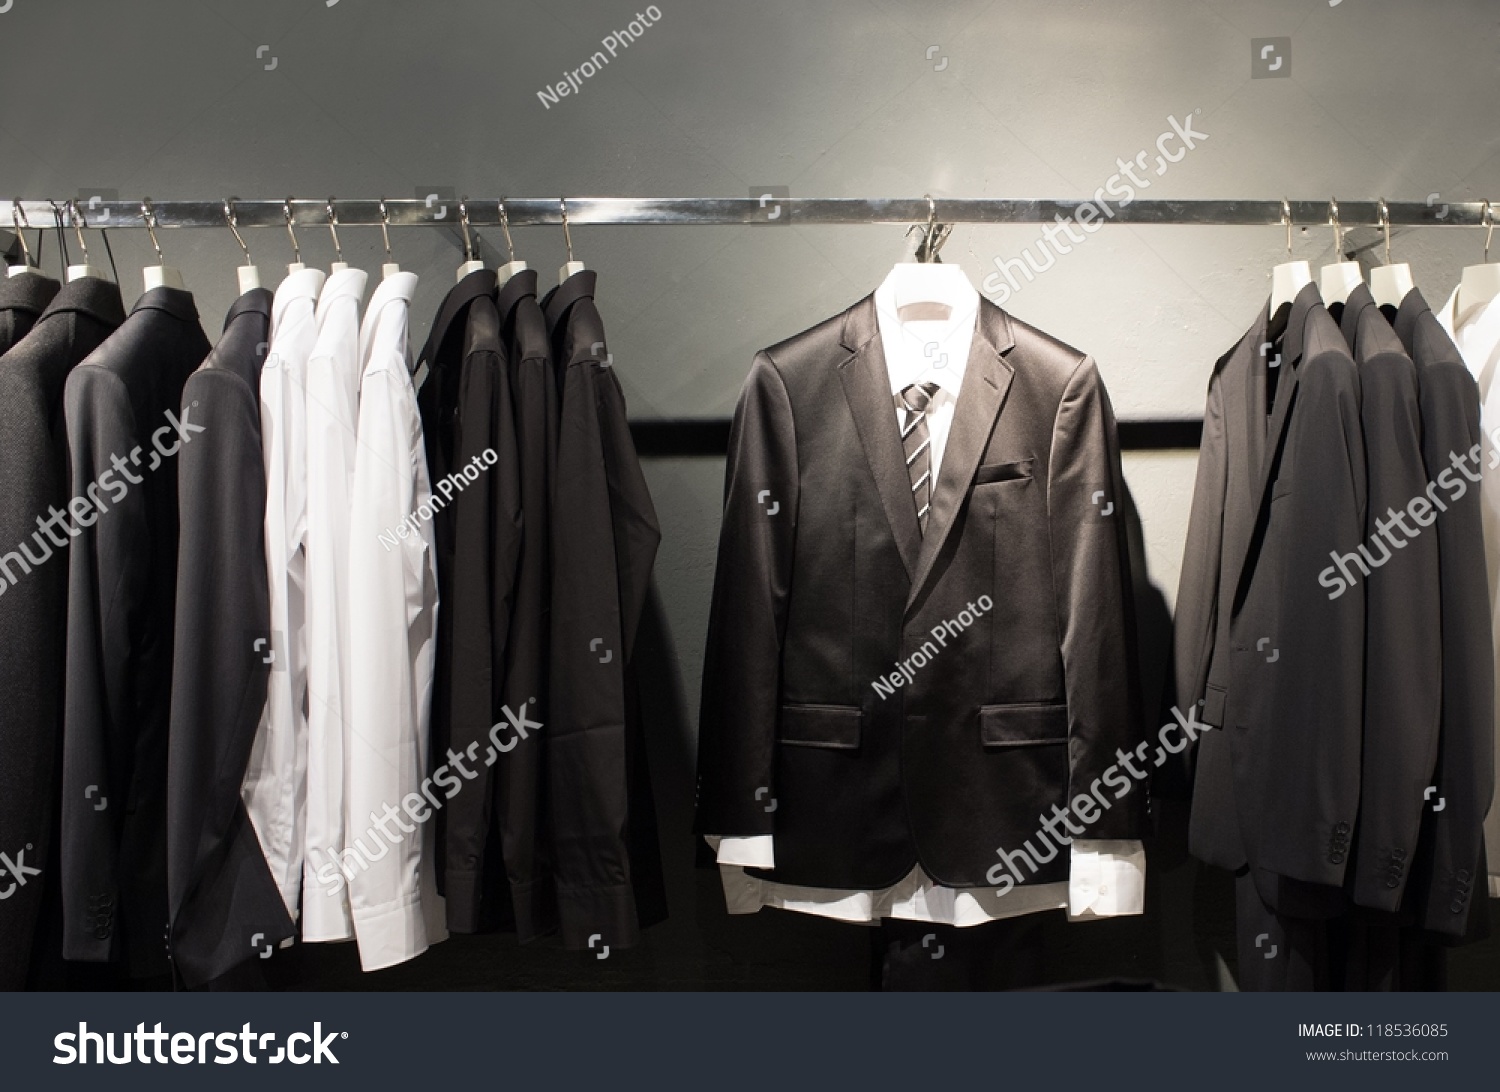 Row Of Suits In Shop Stock Photo 118536085 : Shutterstock